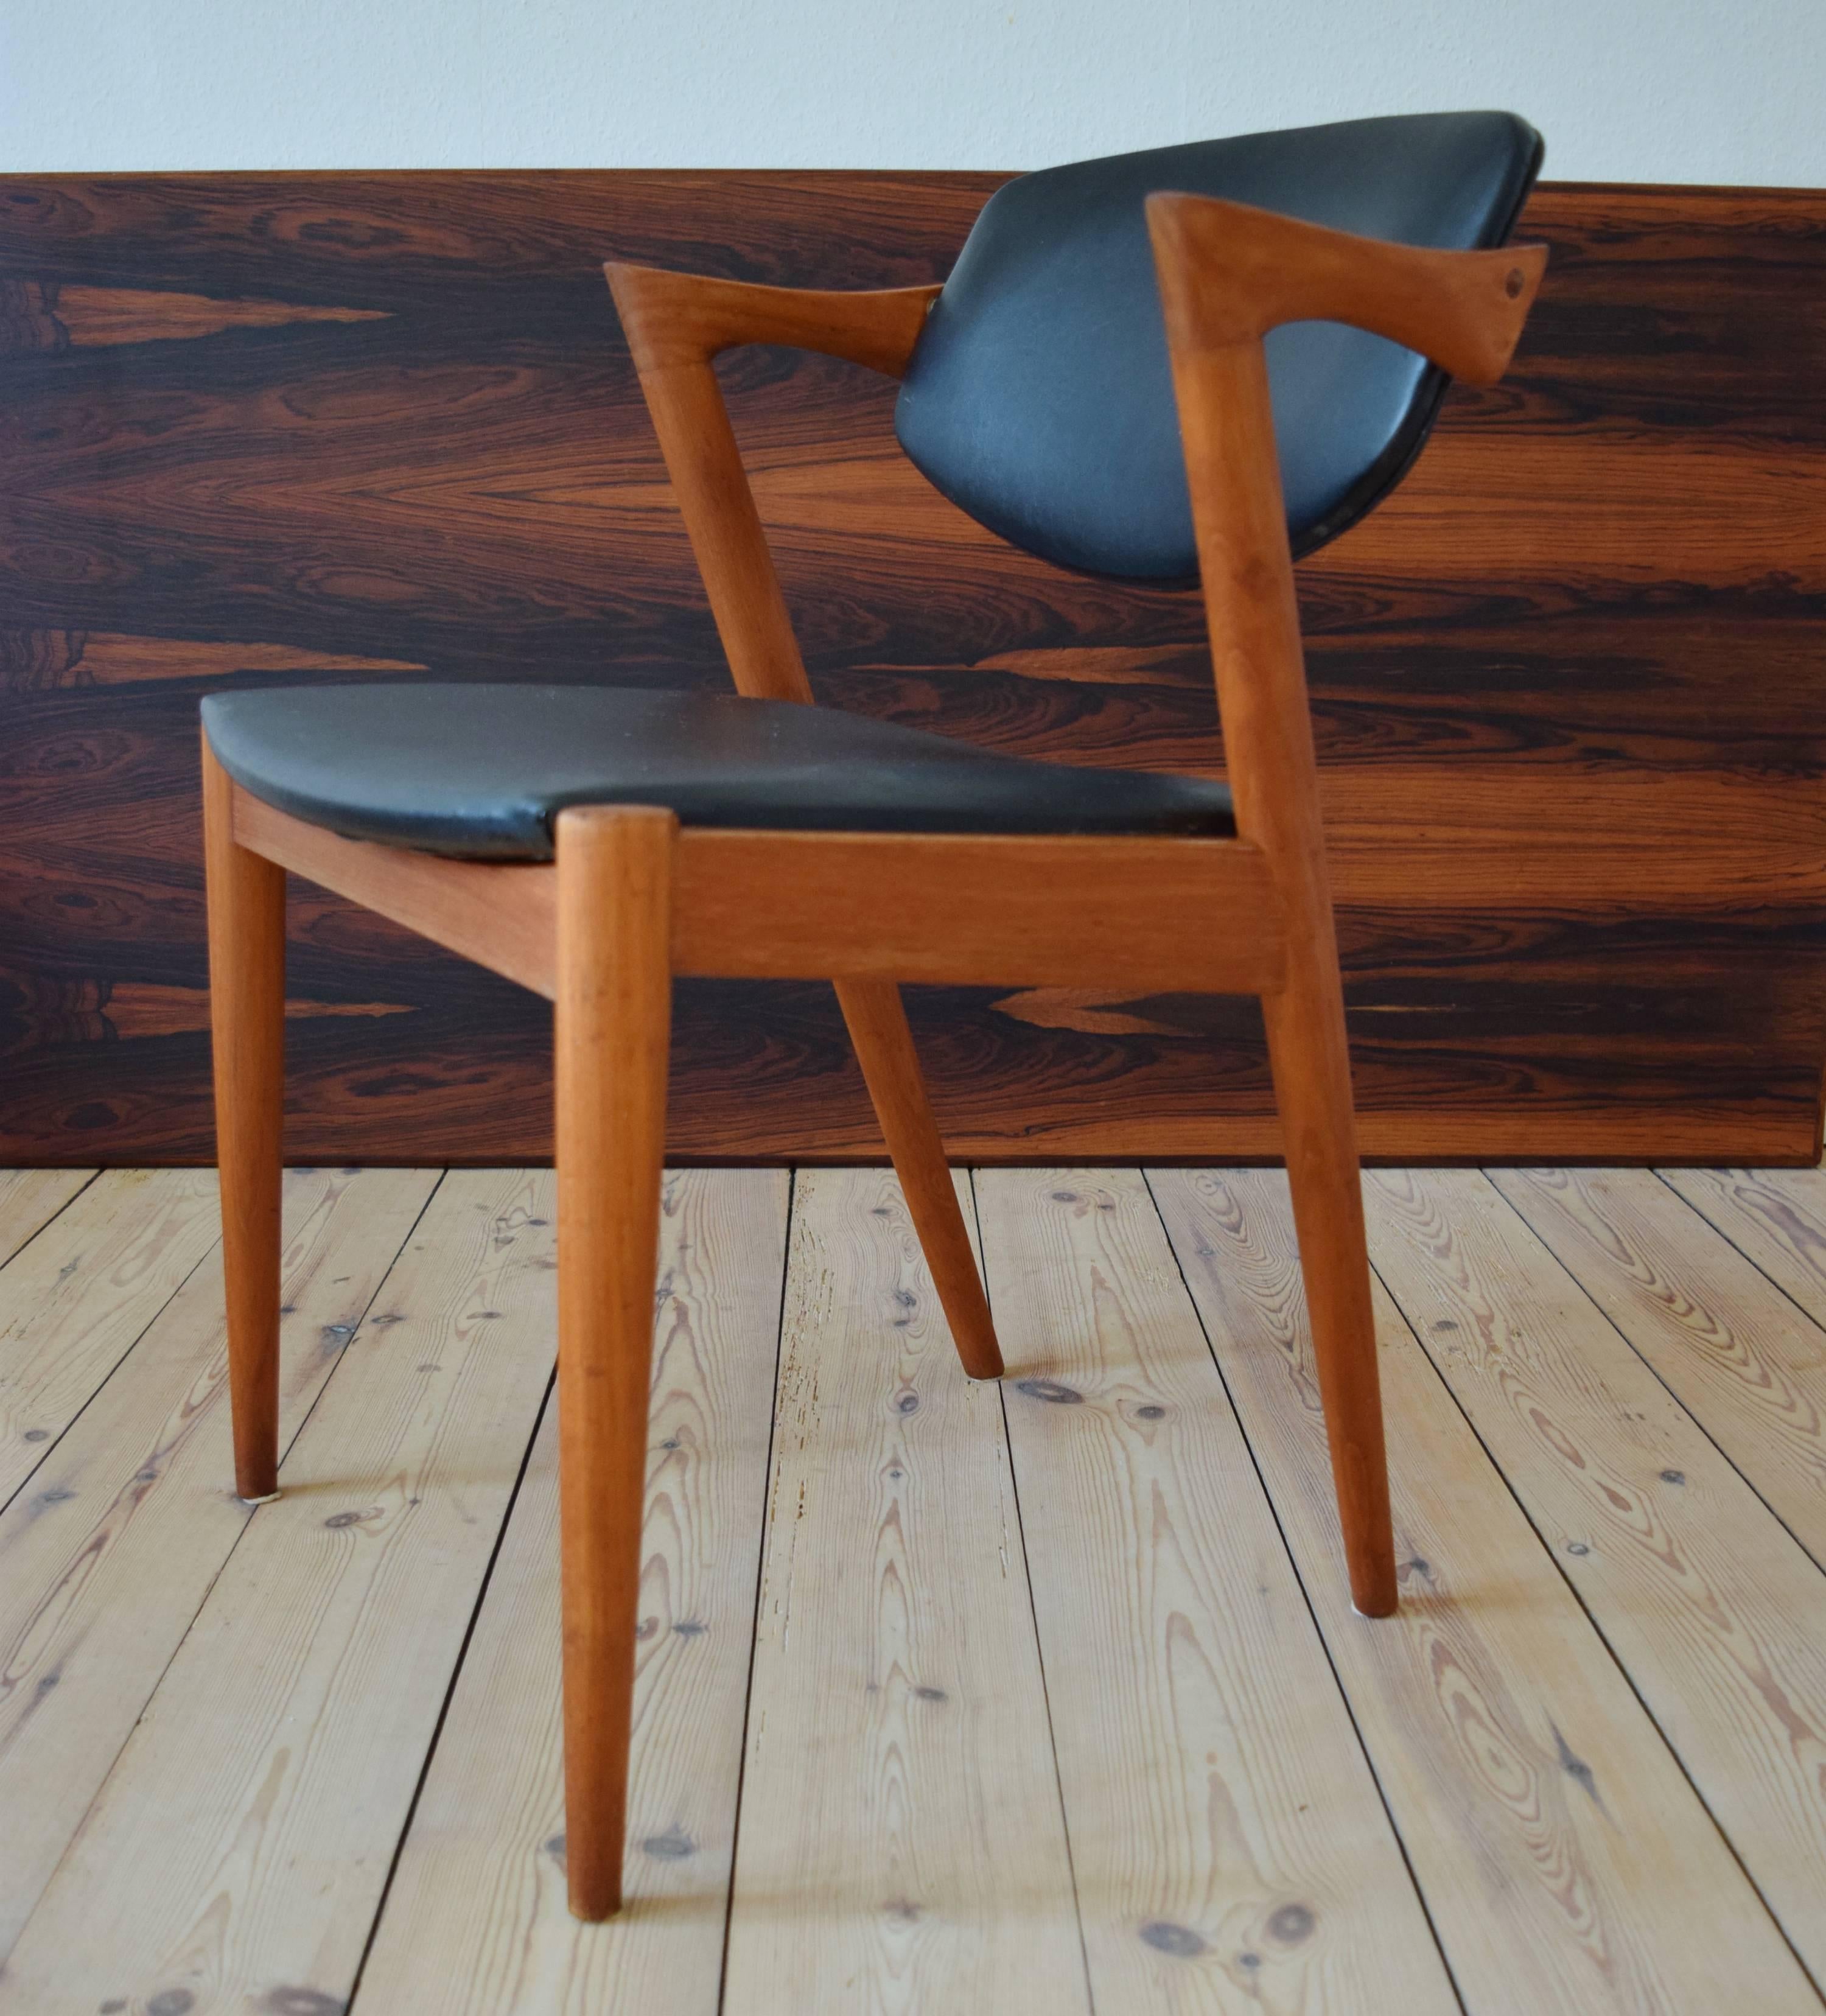 Kai Kristiansen model 42 teak dining chair, manufactured by Schou Andersen in the 1960's. This chair is covered in the original black skai. Chair frames have been re-finished, cleaned and oiled. Some small marks here and there commensurate with age,